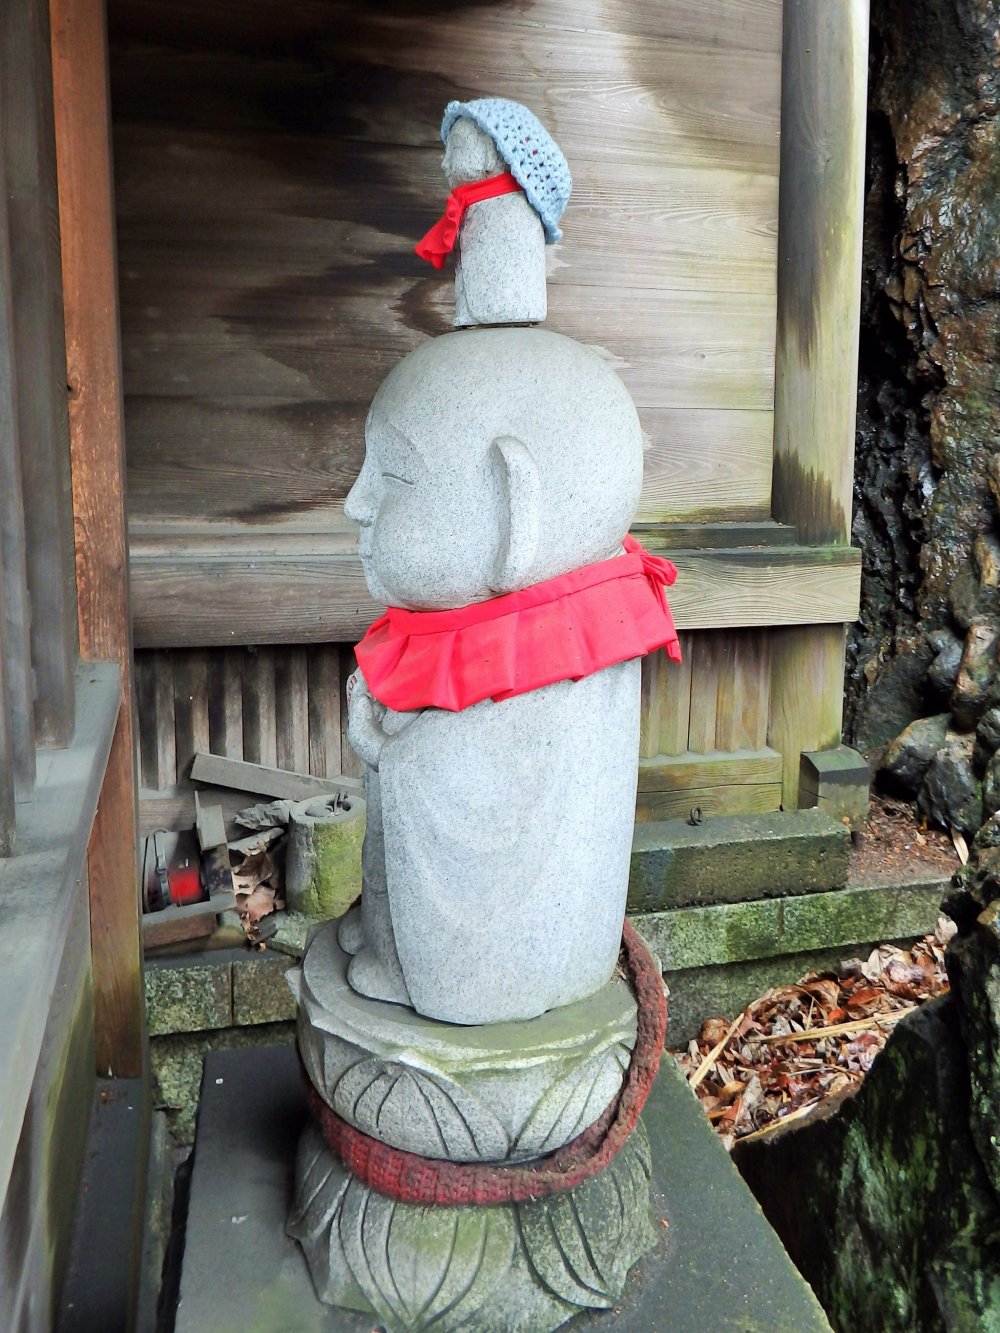 If you peer in from the side, the Jizo has another tiny Jizo&nbsp;balancing on his head!